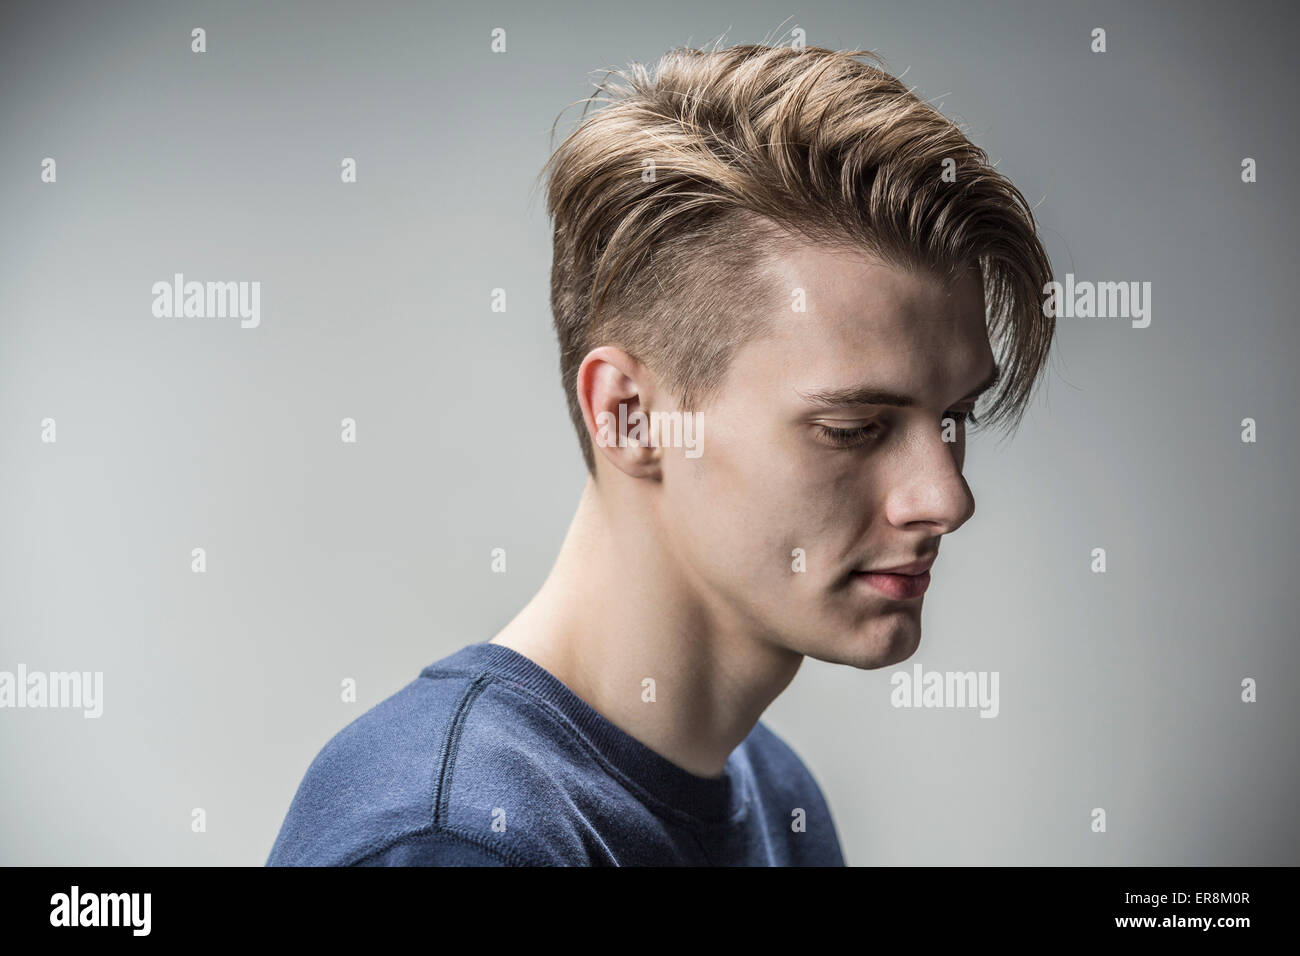 Sad young man against gray background Stock Photo